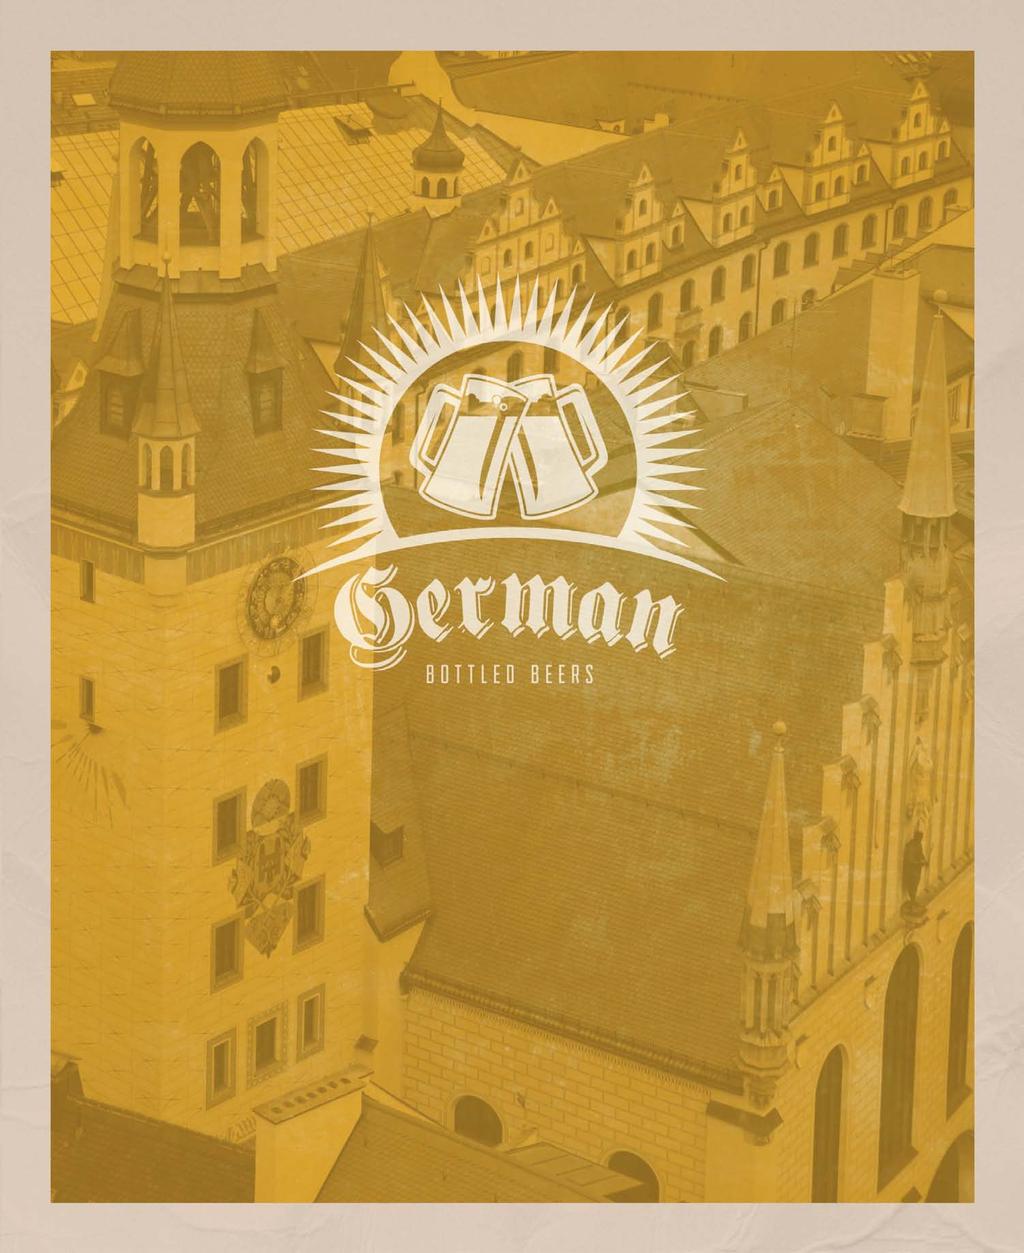 A country with a long and rich beer heritage, German breweries produce a wonderful variety of pilsners, weißbier, schwarzbier and Kölsch, many of which have strongly influenced brewing around the